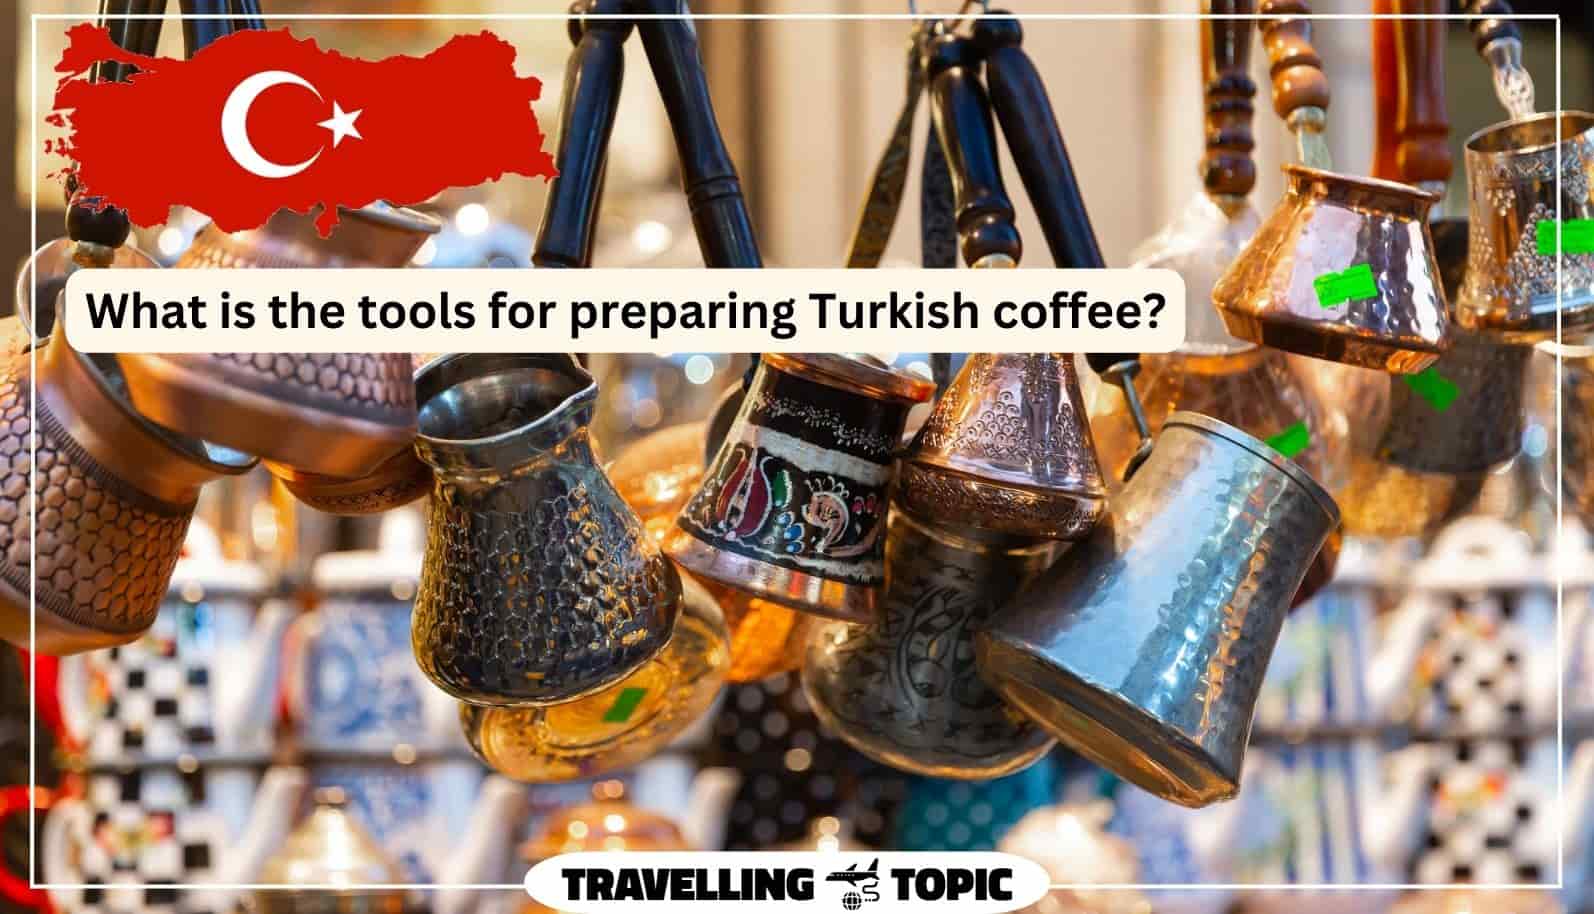 What is the tools for preparing Turkish coffee